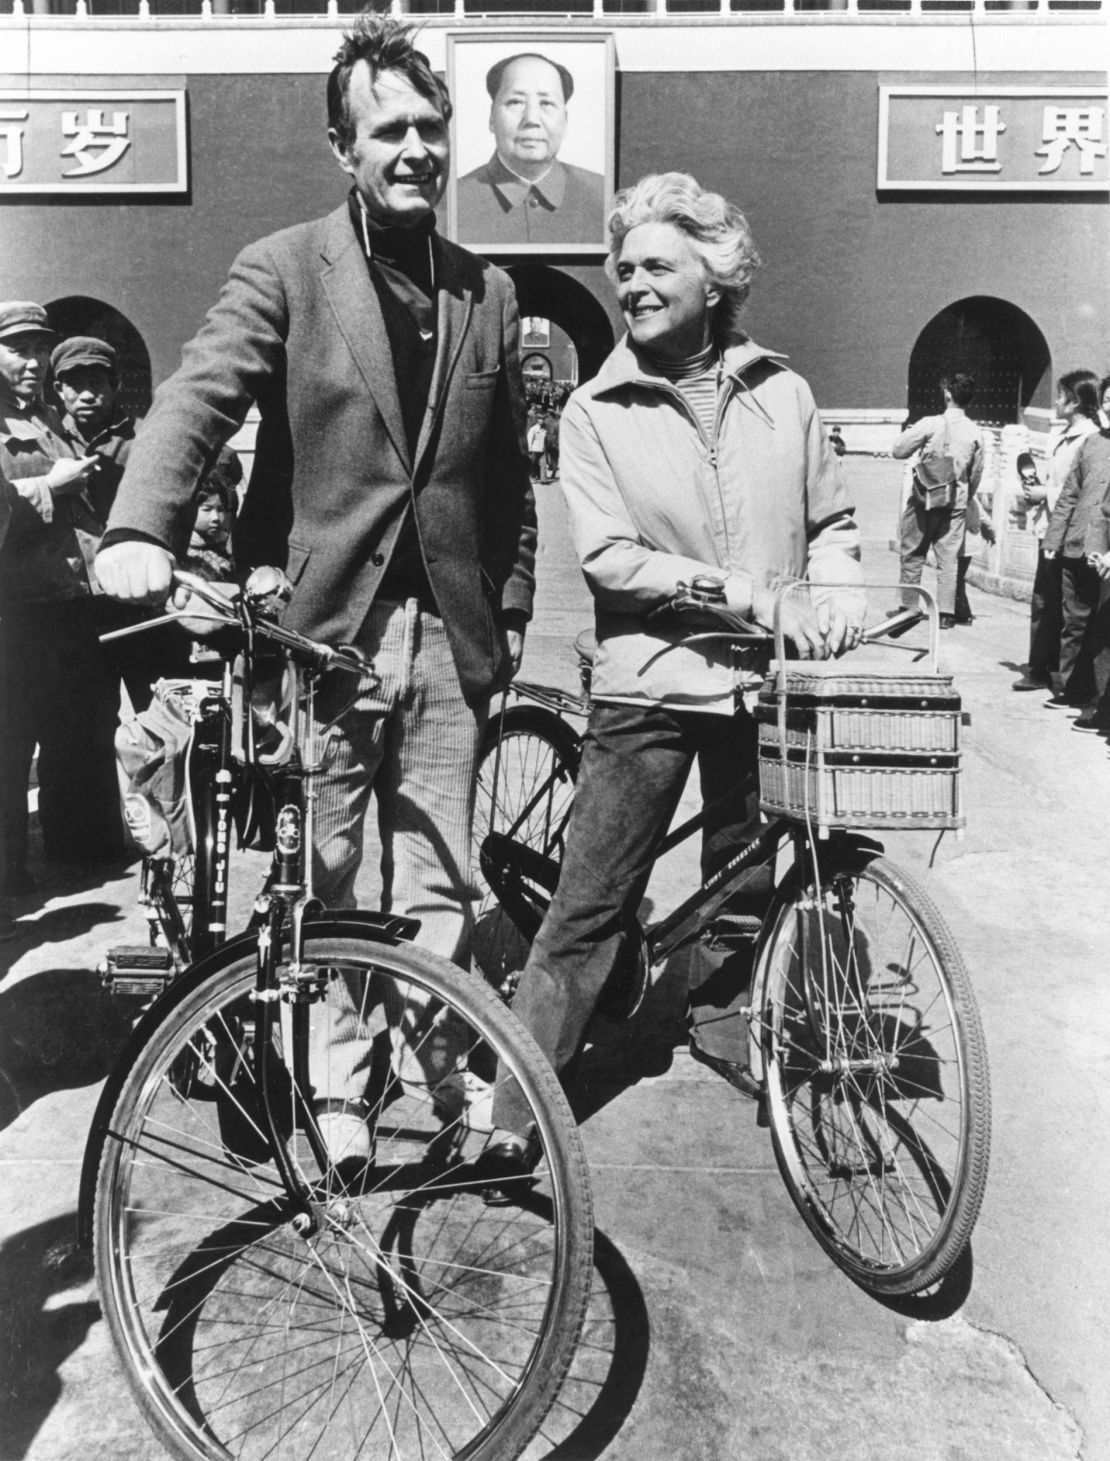 Bush poses with his wife Barbara in Beijing in 1974.